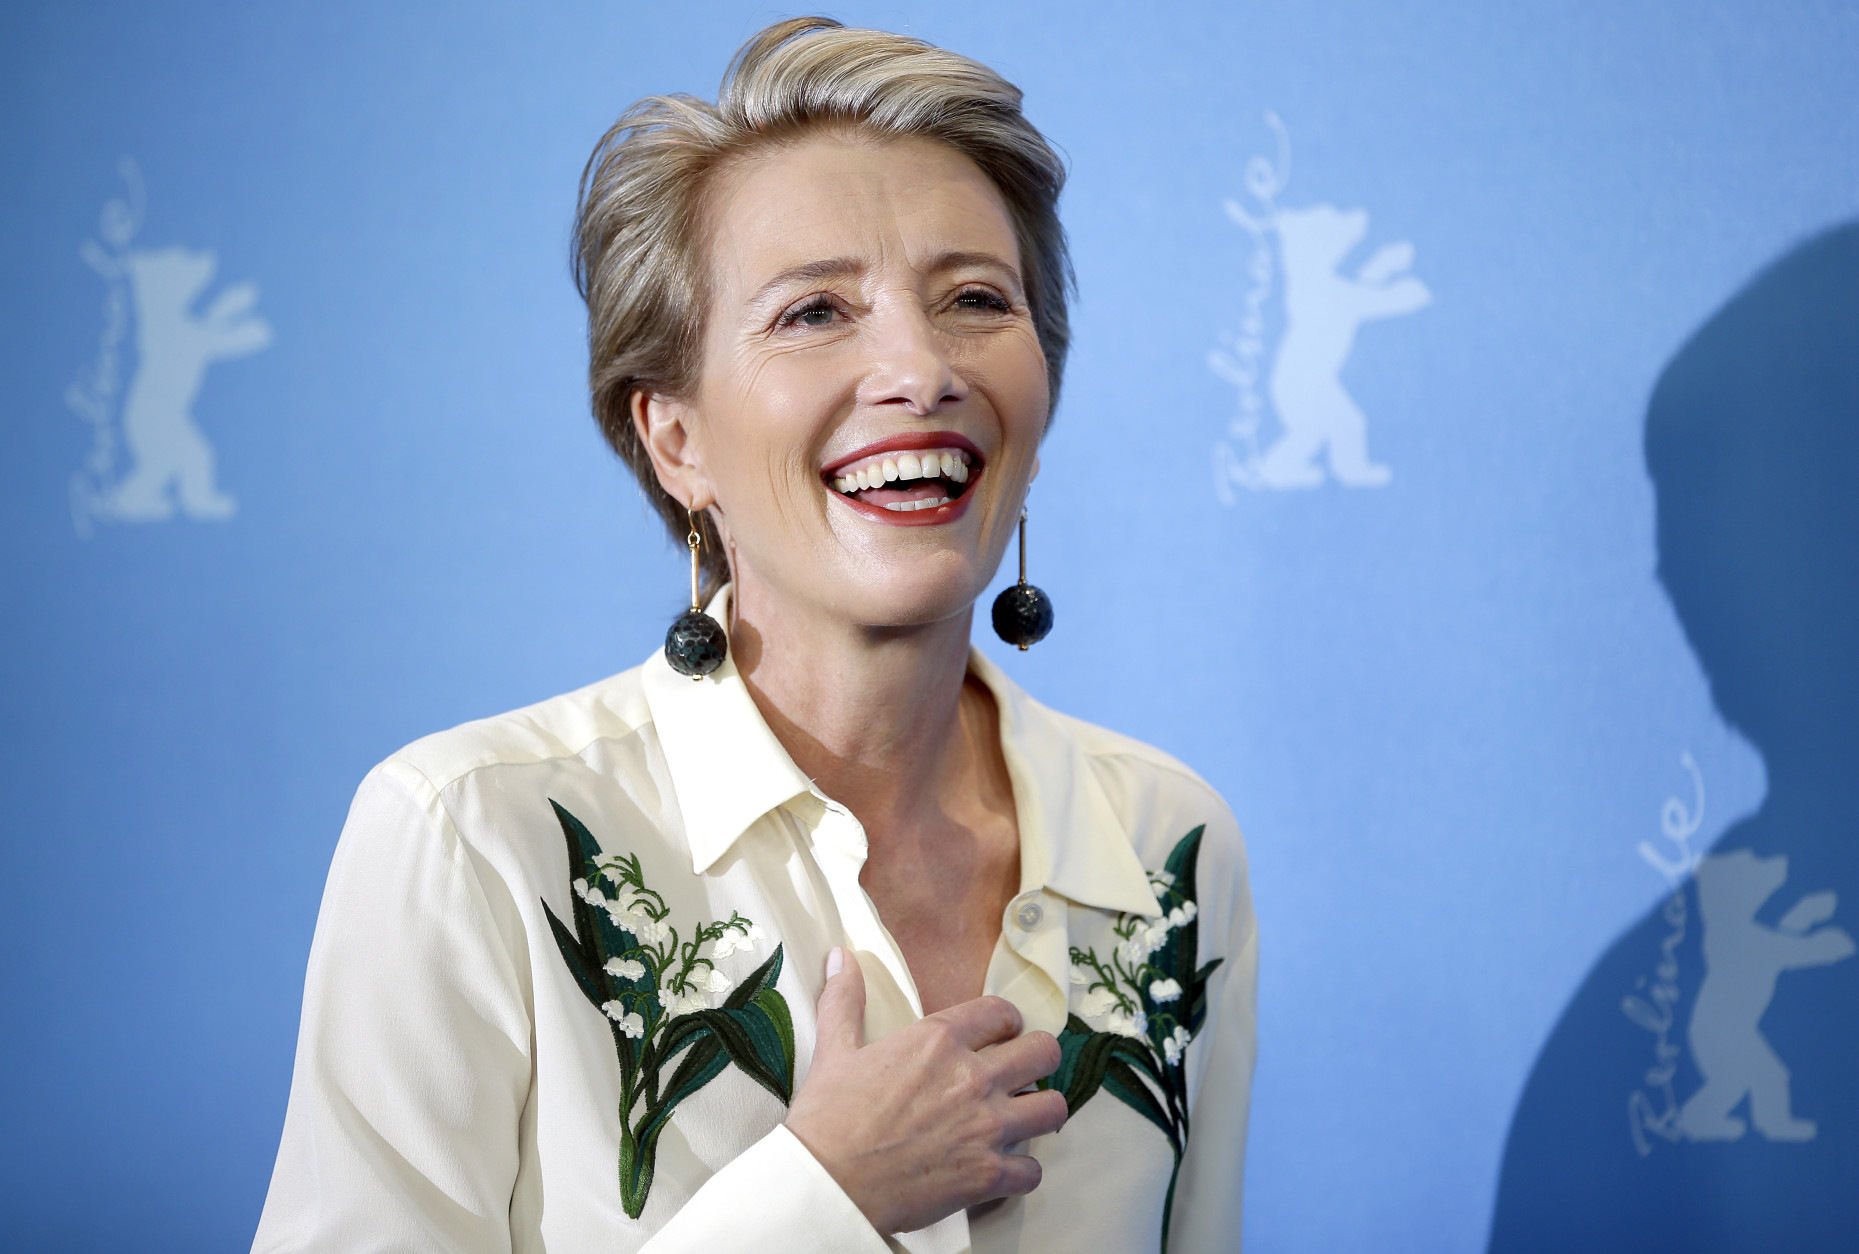 Actress Emma Thompson smiles during a photo call for the film 'Alone in Berlin' at the 2016 Berlinale Film Festival in Berlin, Germany, Monday, Feb. 15, 2016. (AP Photo/Michael Sohn)